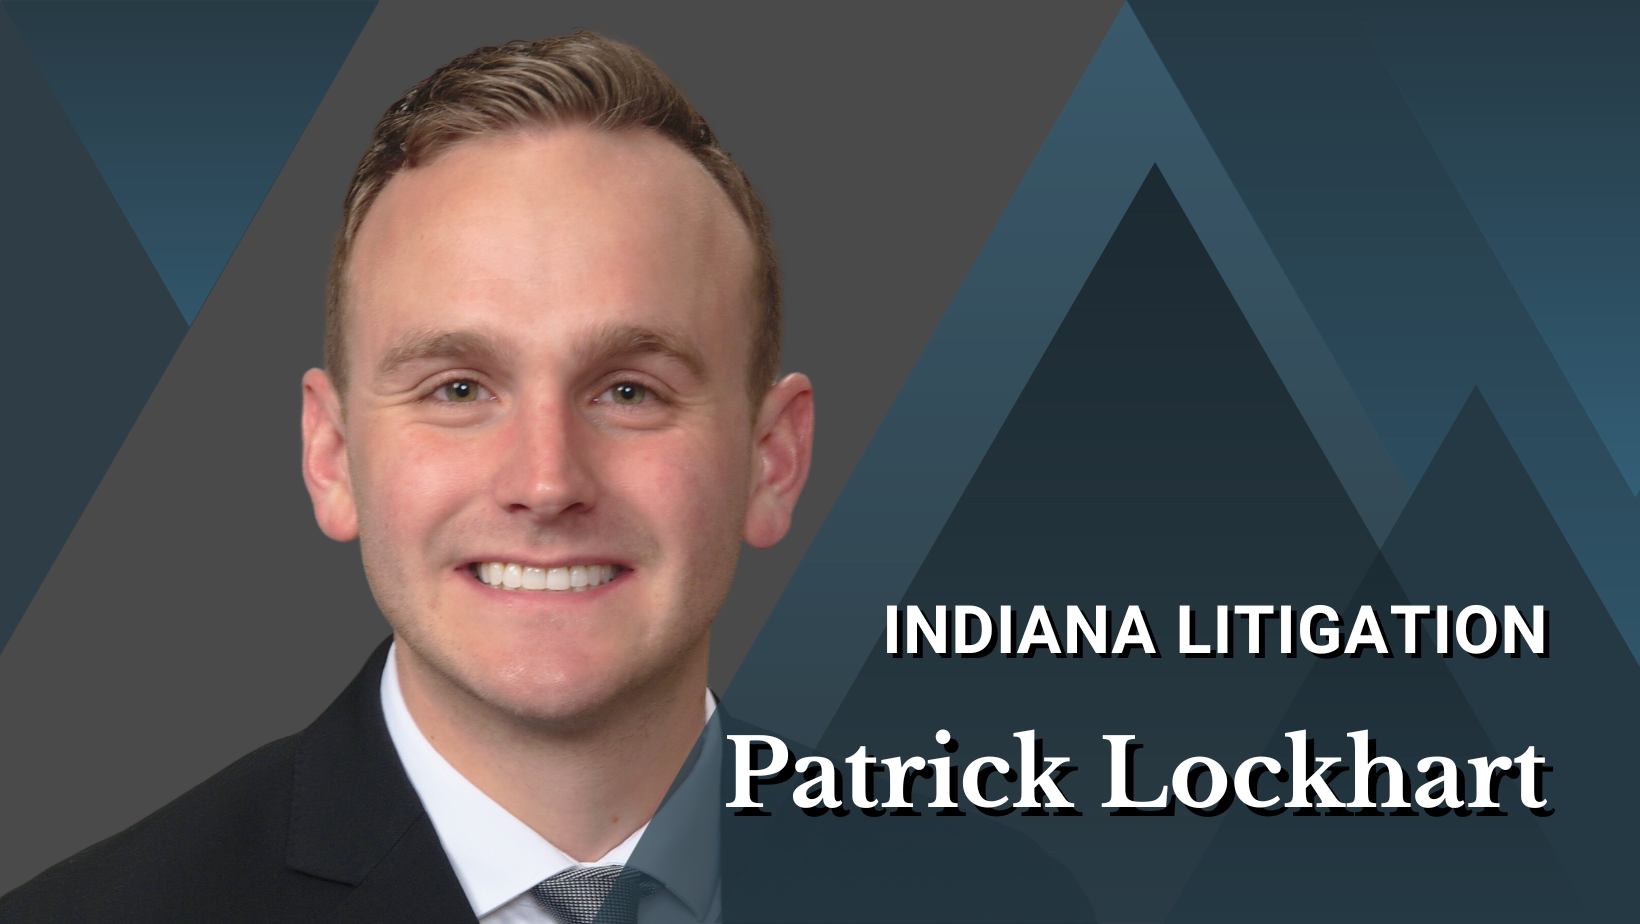 Banner of Patrick Lockhart as the focal image with shades of blue and grey and text reading indiana litigation and patrick lockhart